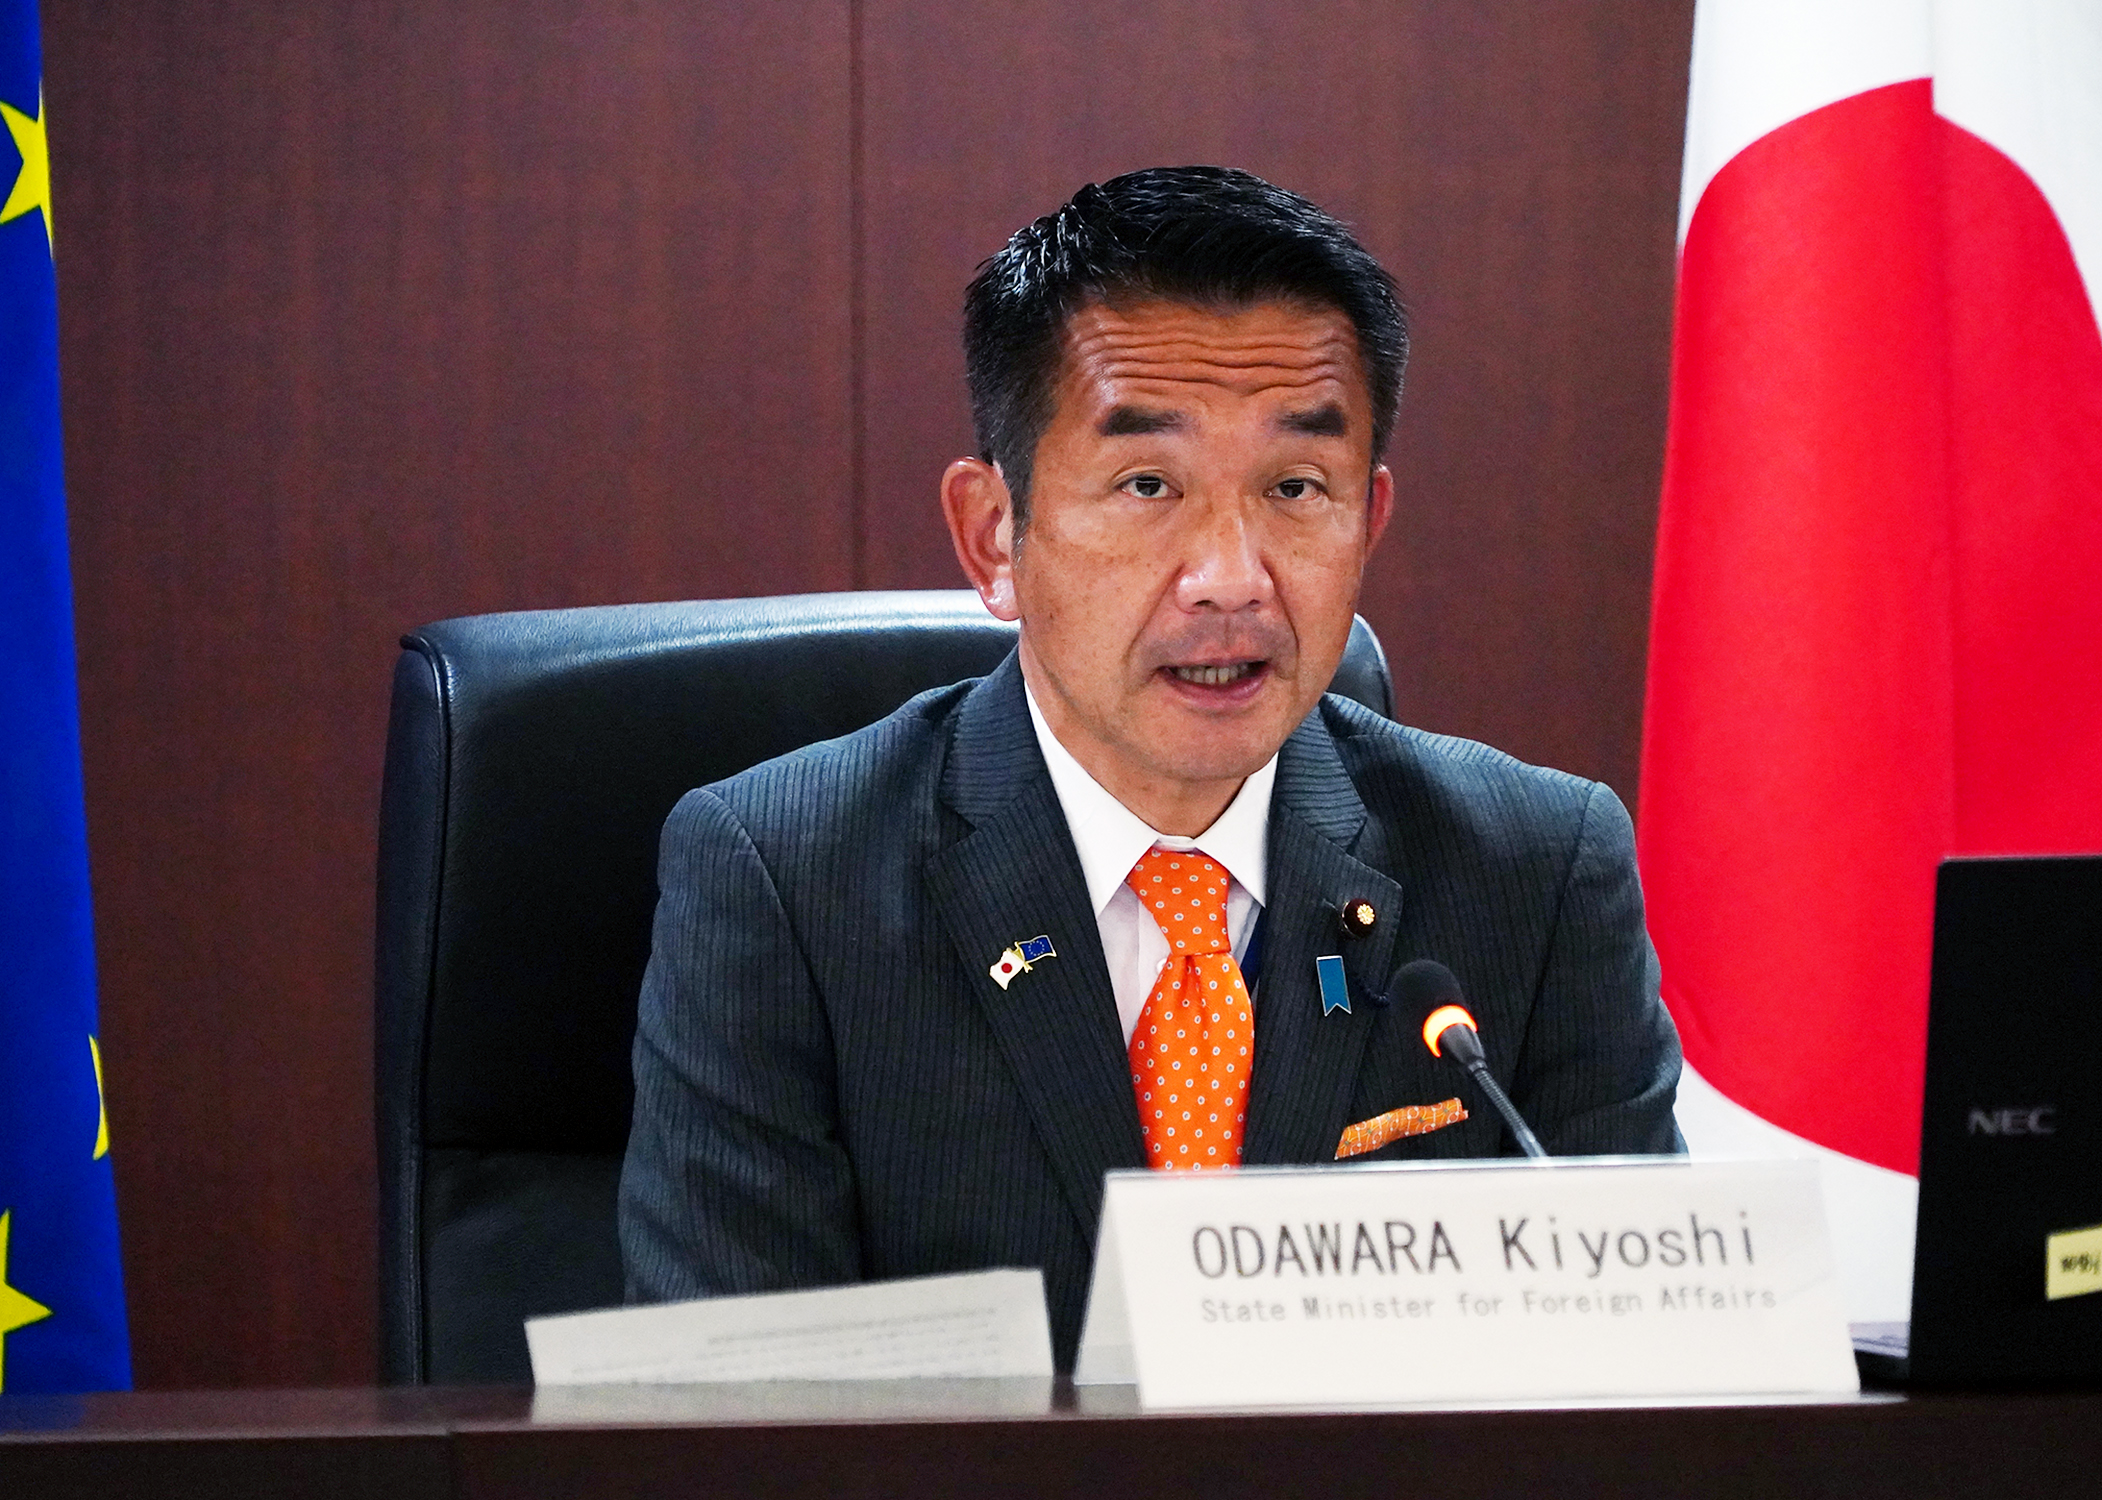 MOFA State Minister Odawara during the handover session